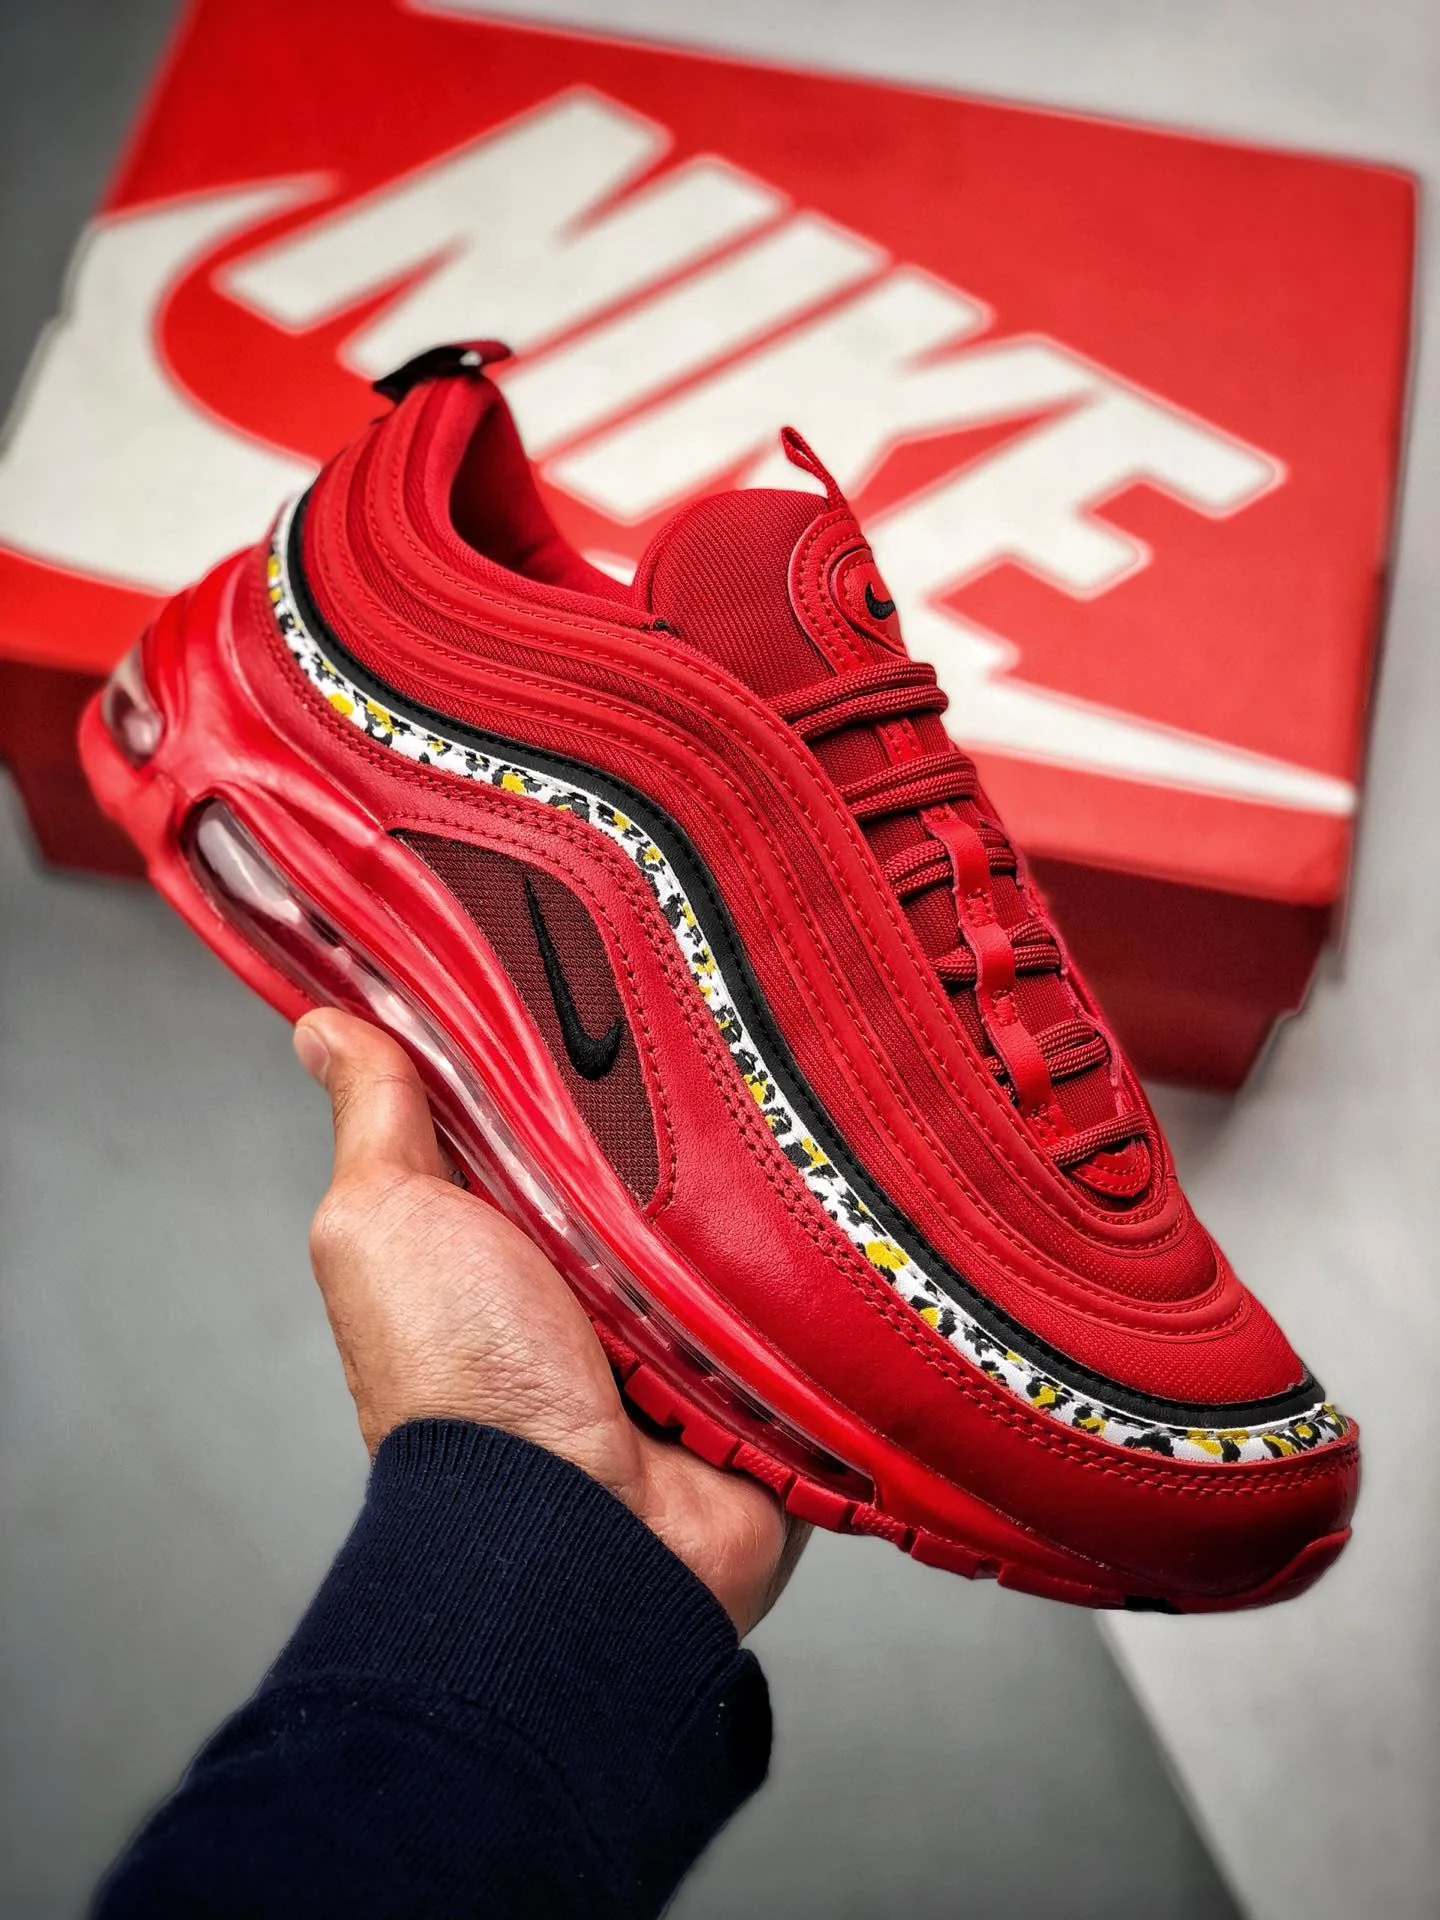 Nike Air Max 97 Red Leopard BV6113-600 On Sale